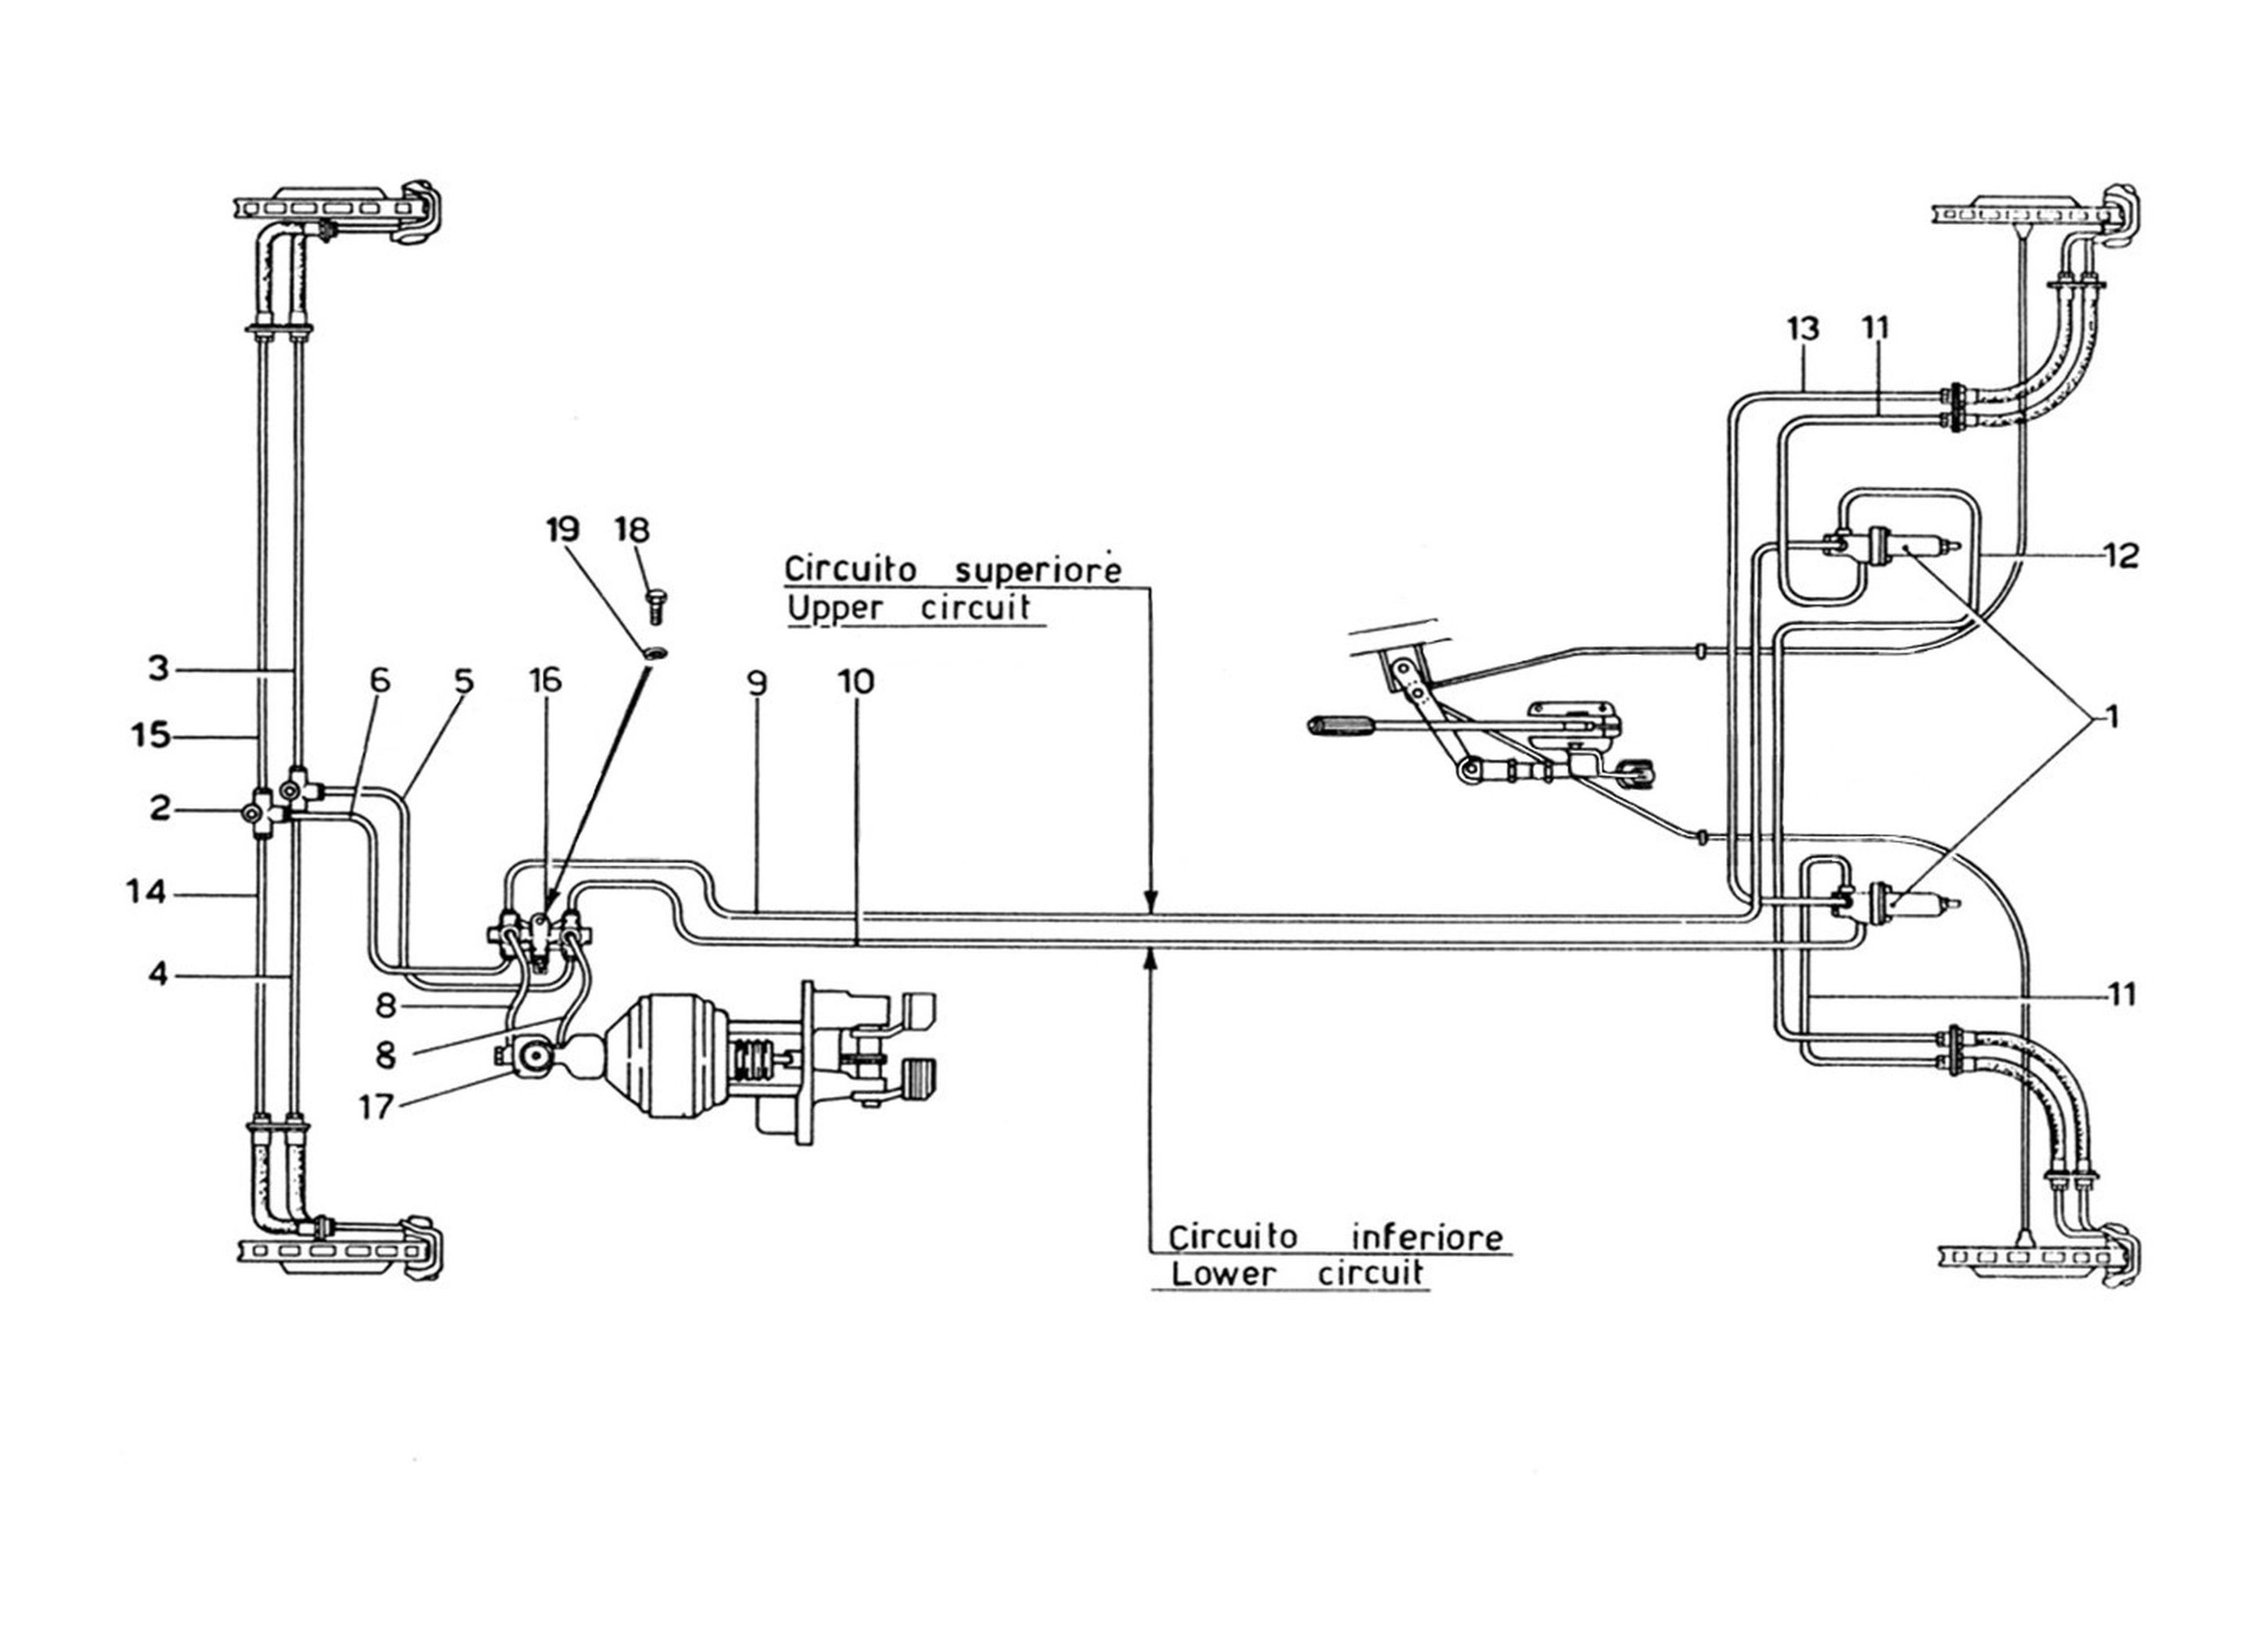 Schematic: Brake Lines System (1974 Revision)